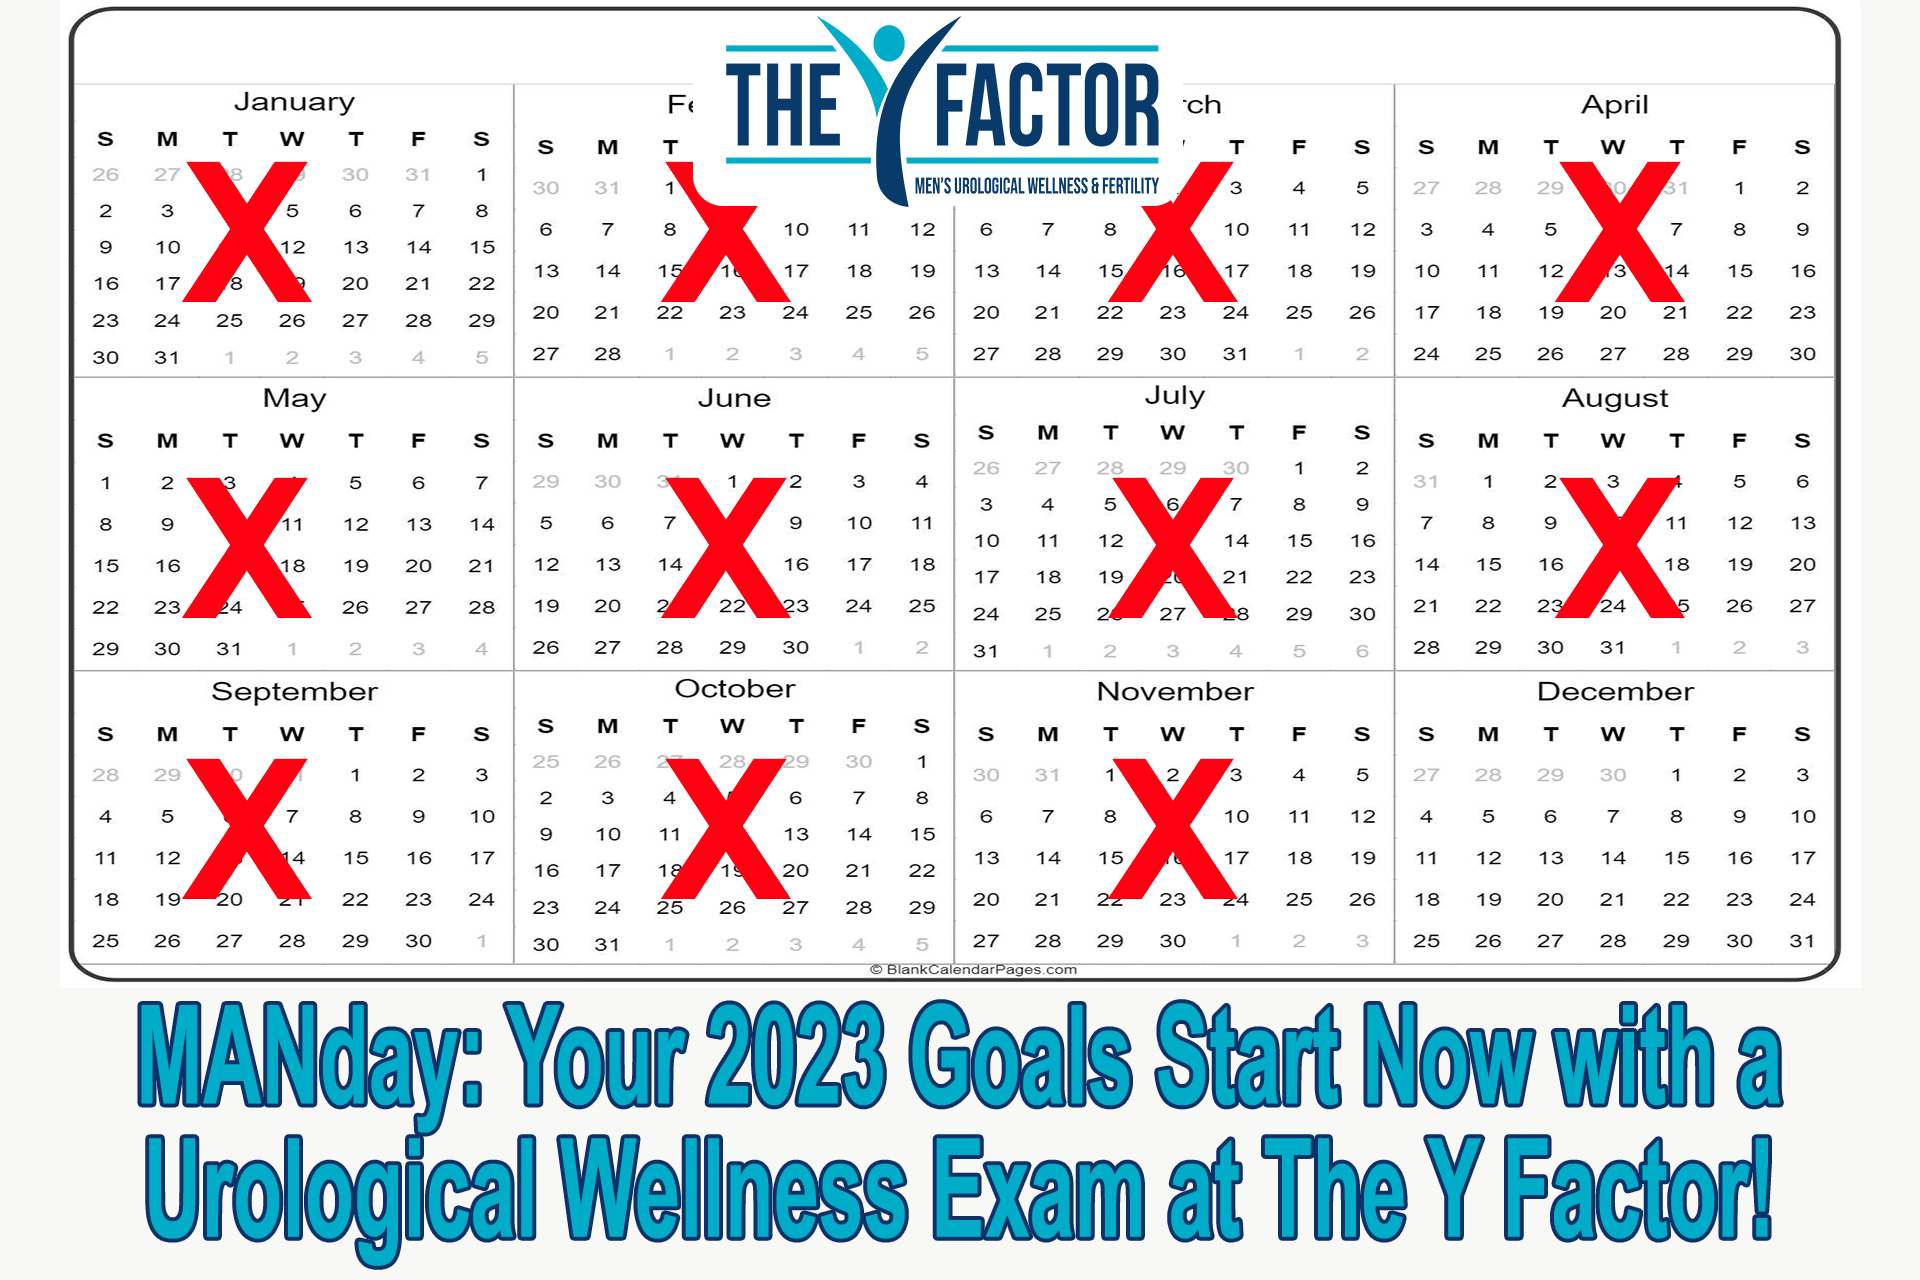 manday-your-2023-goals-start-now-with-a-urological-wellness-exam-at